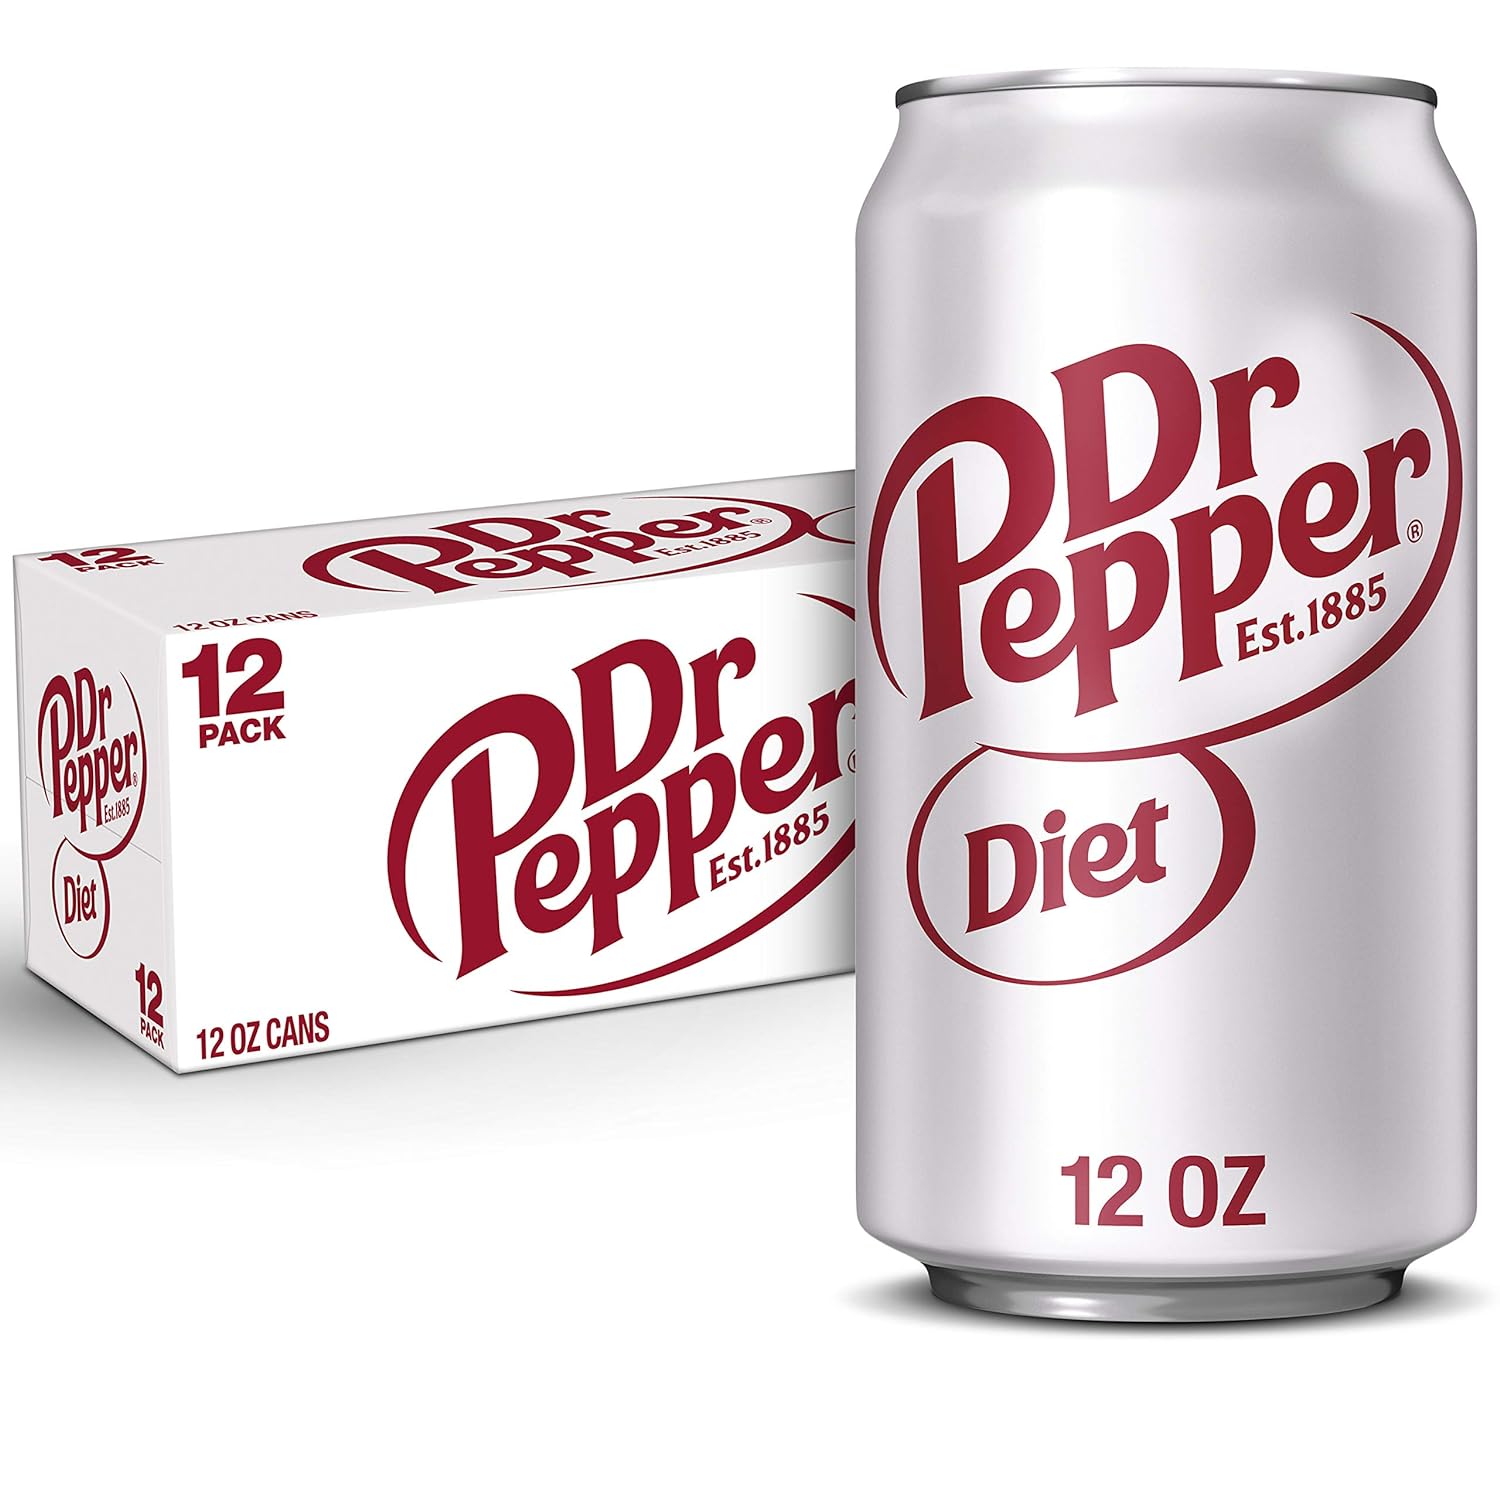 You Won't Believe How Much Sugar Is In A Diet Dr. Pepper!